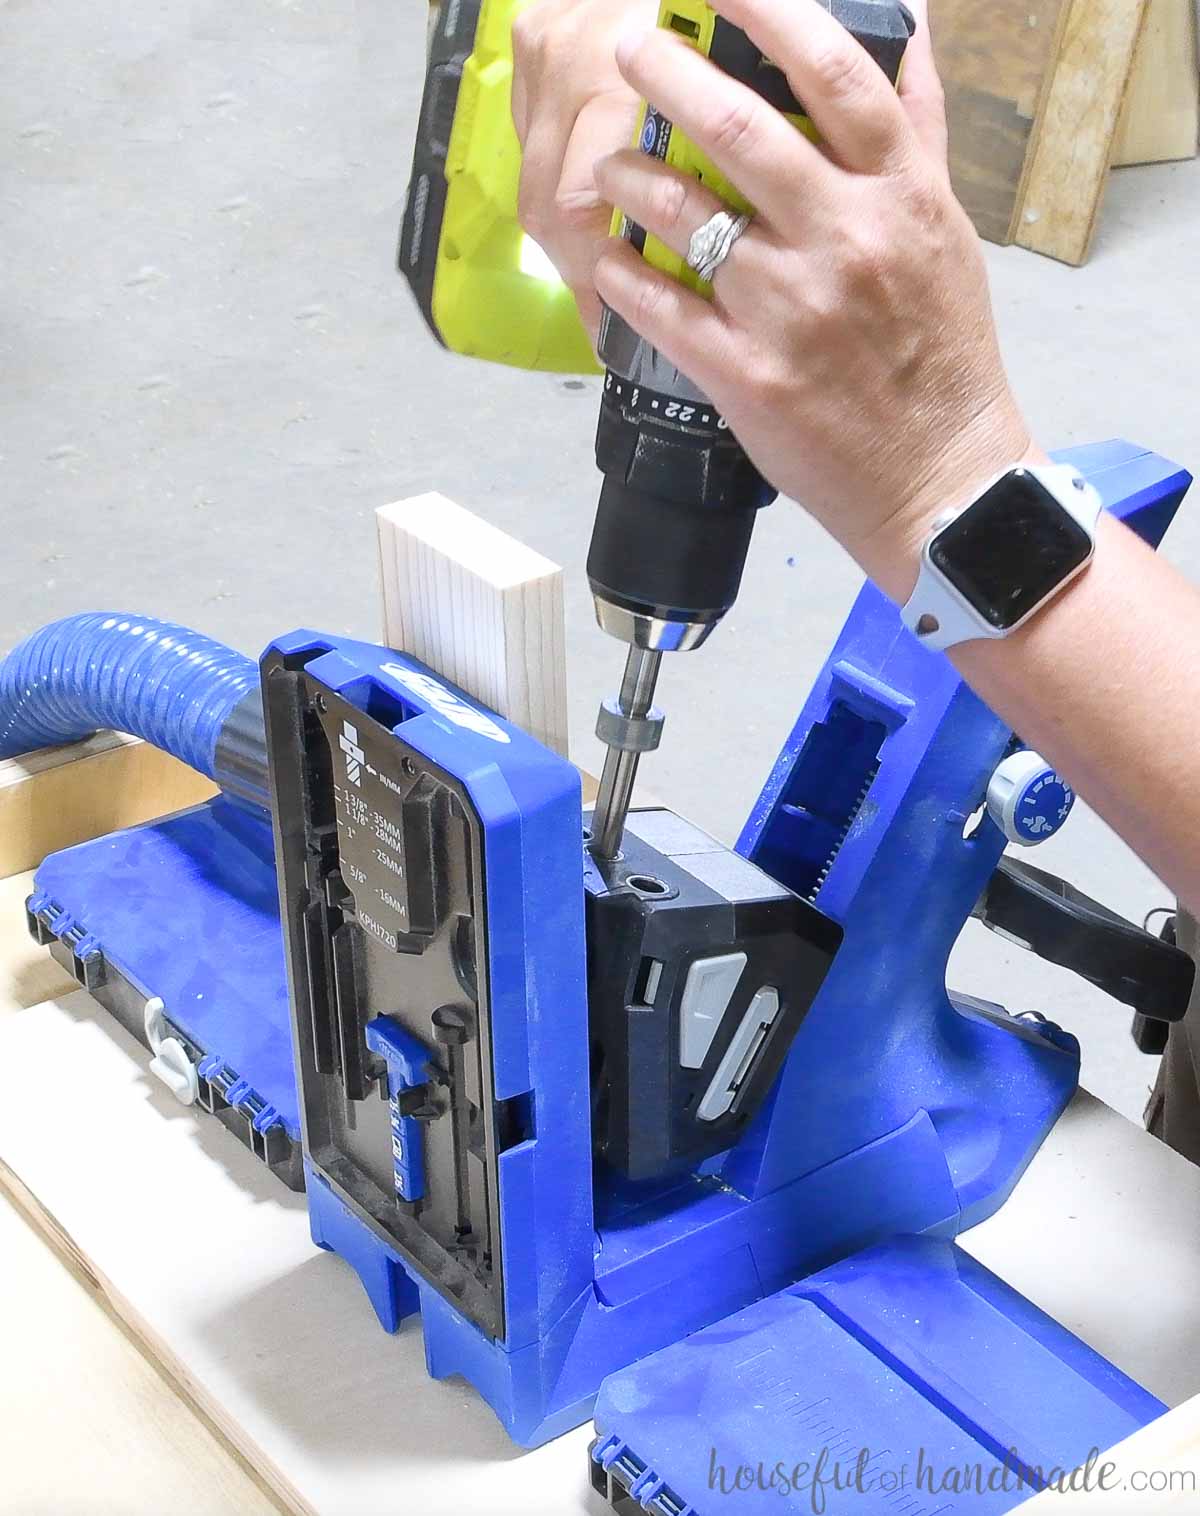 Drilling pocket holes in 1x3 boards with the Kreg 720Pro pocket hole jig. 